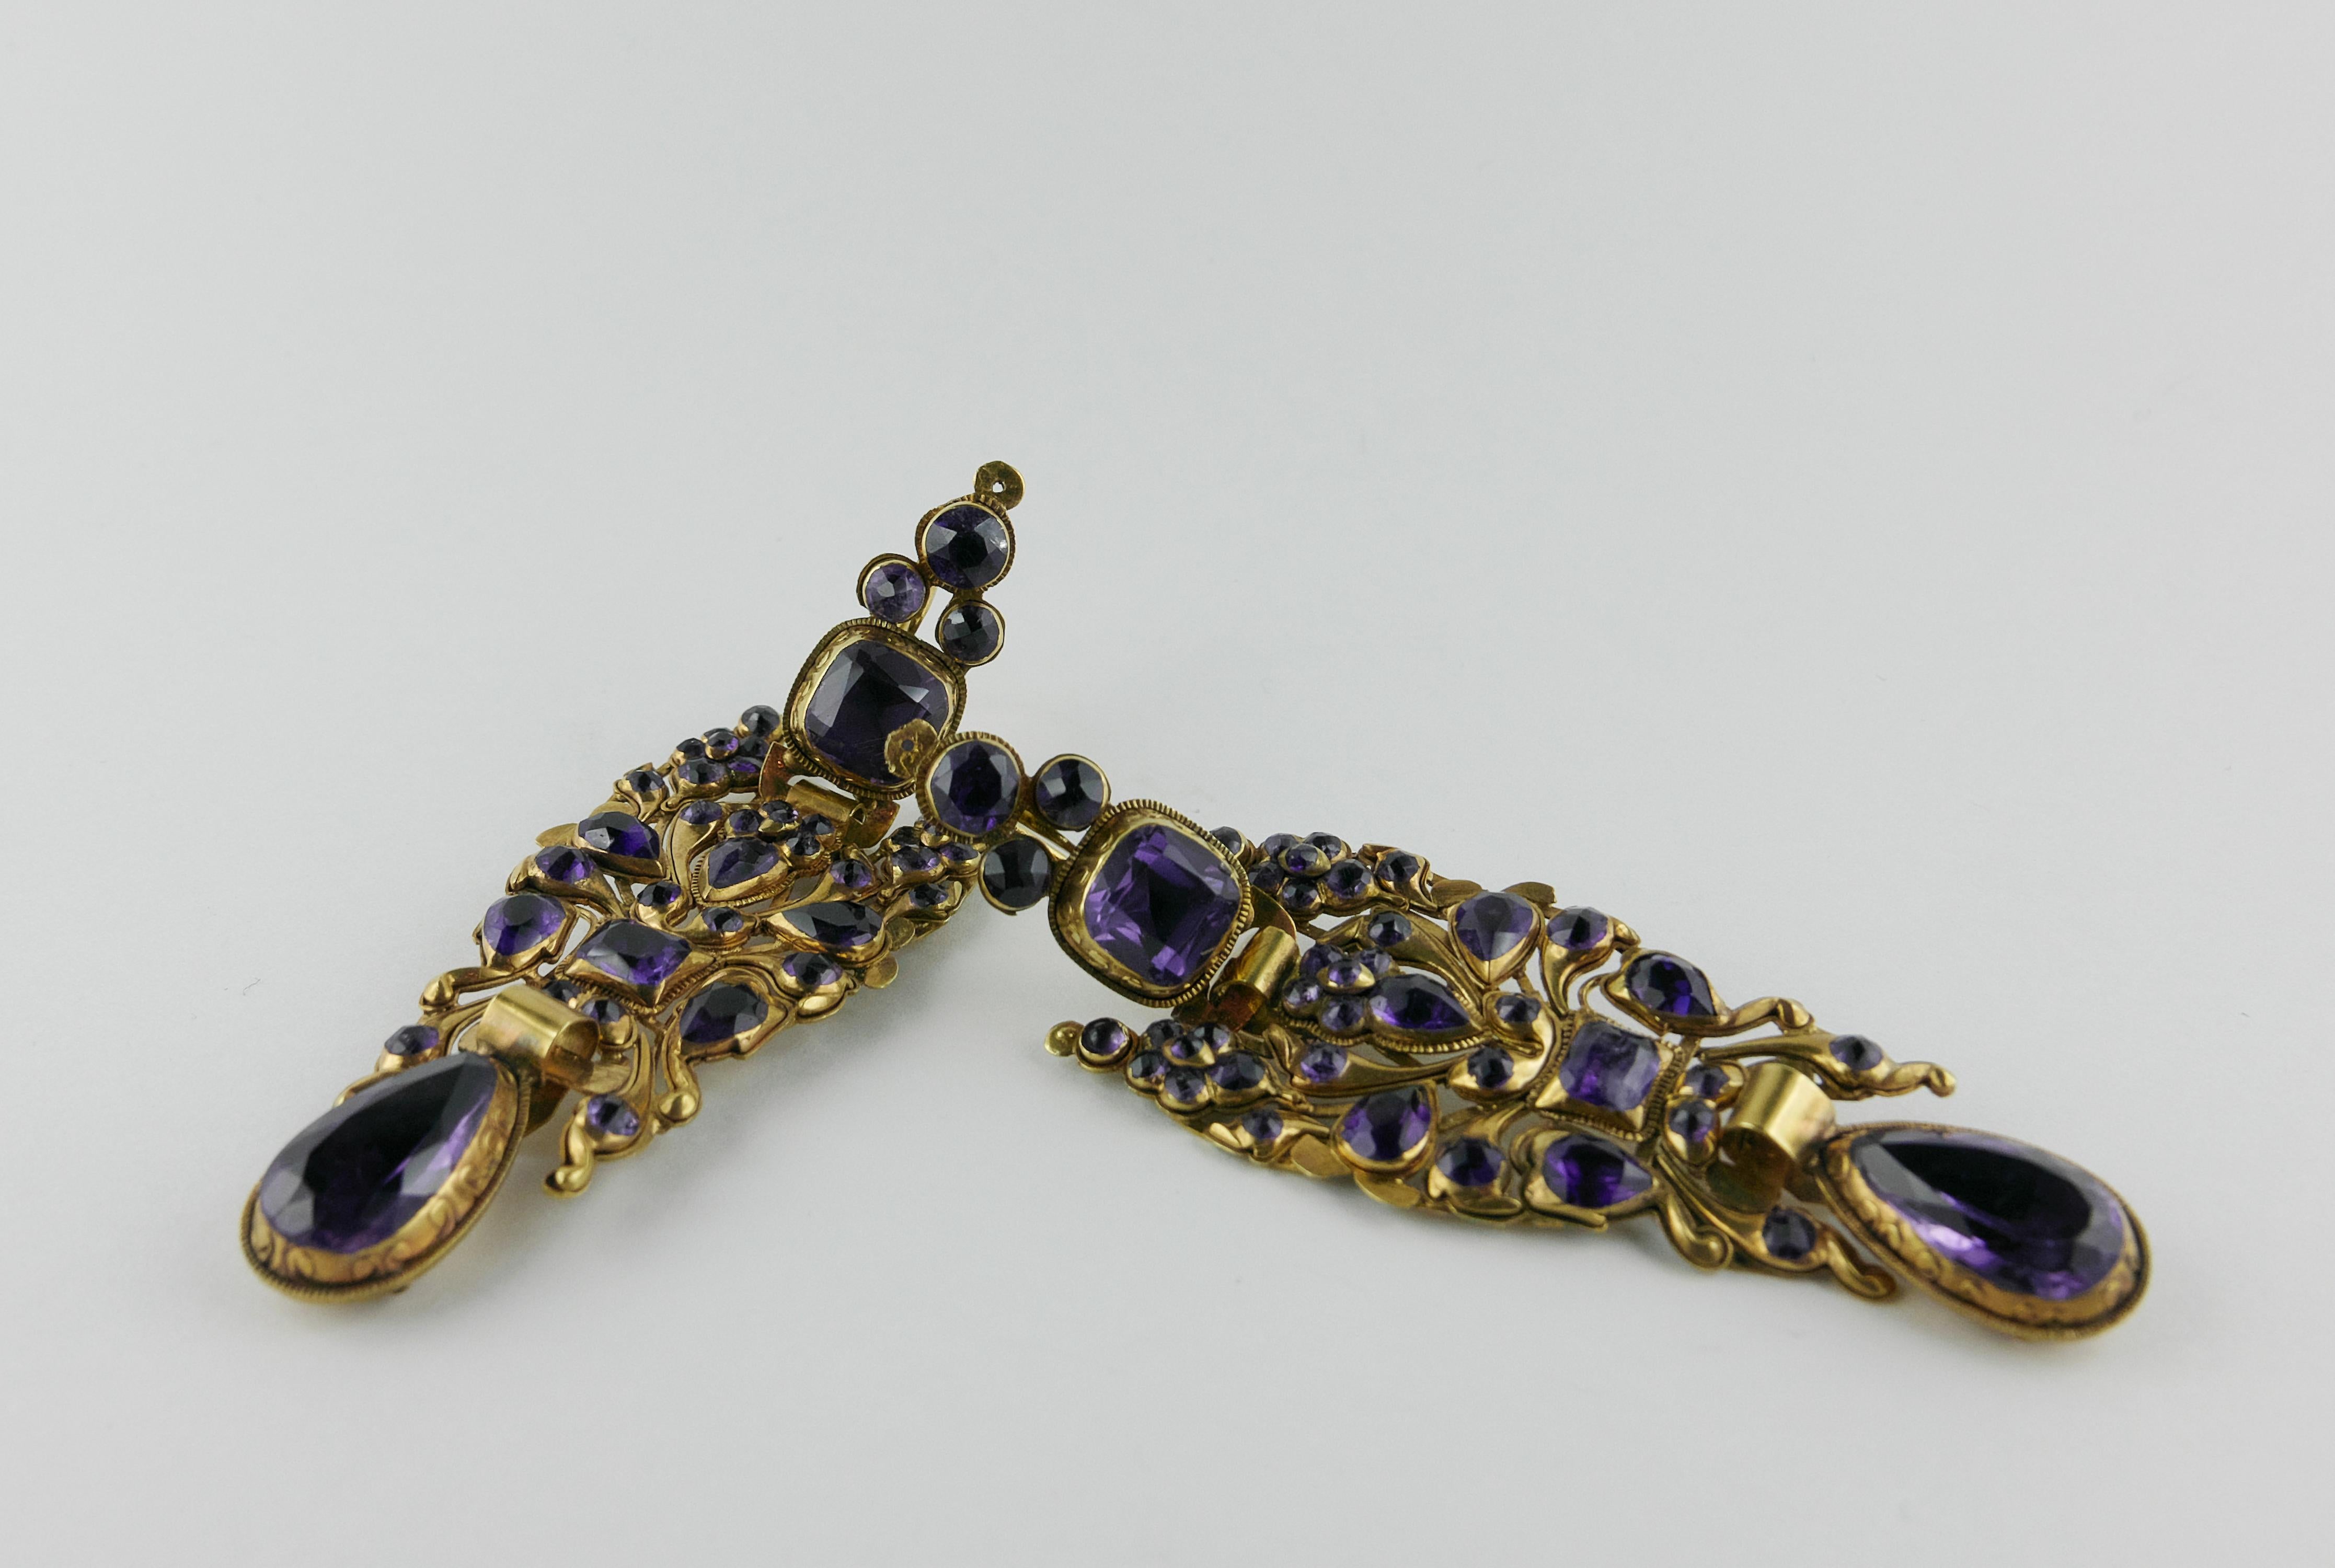 Imposing, rare and original pair of antique bridal long pendant Earrings crafted  in Catalonia (Spain) between 1790 and 1820. Known within Catalonia as les arracades d’arengada “the herring Earrings